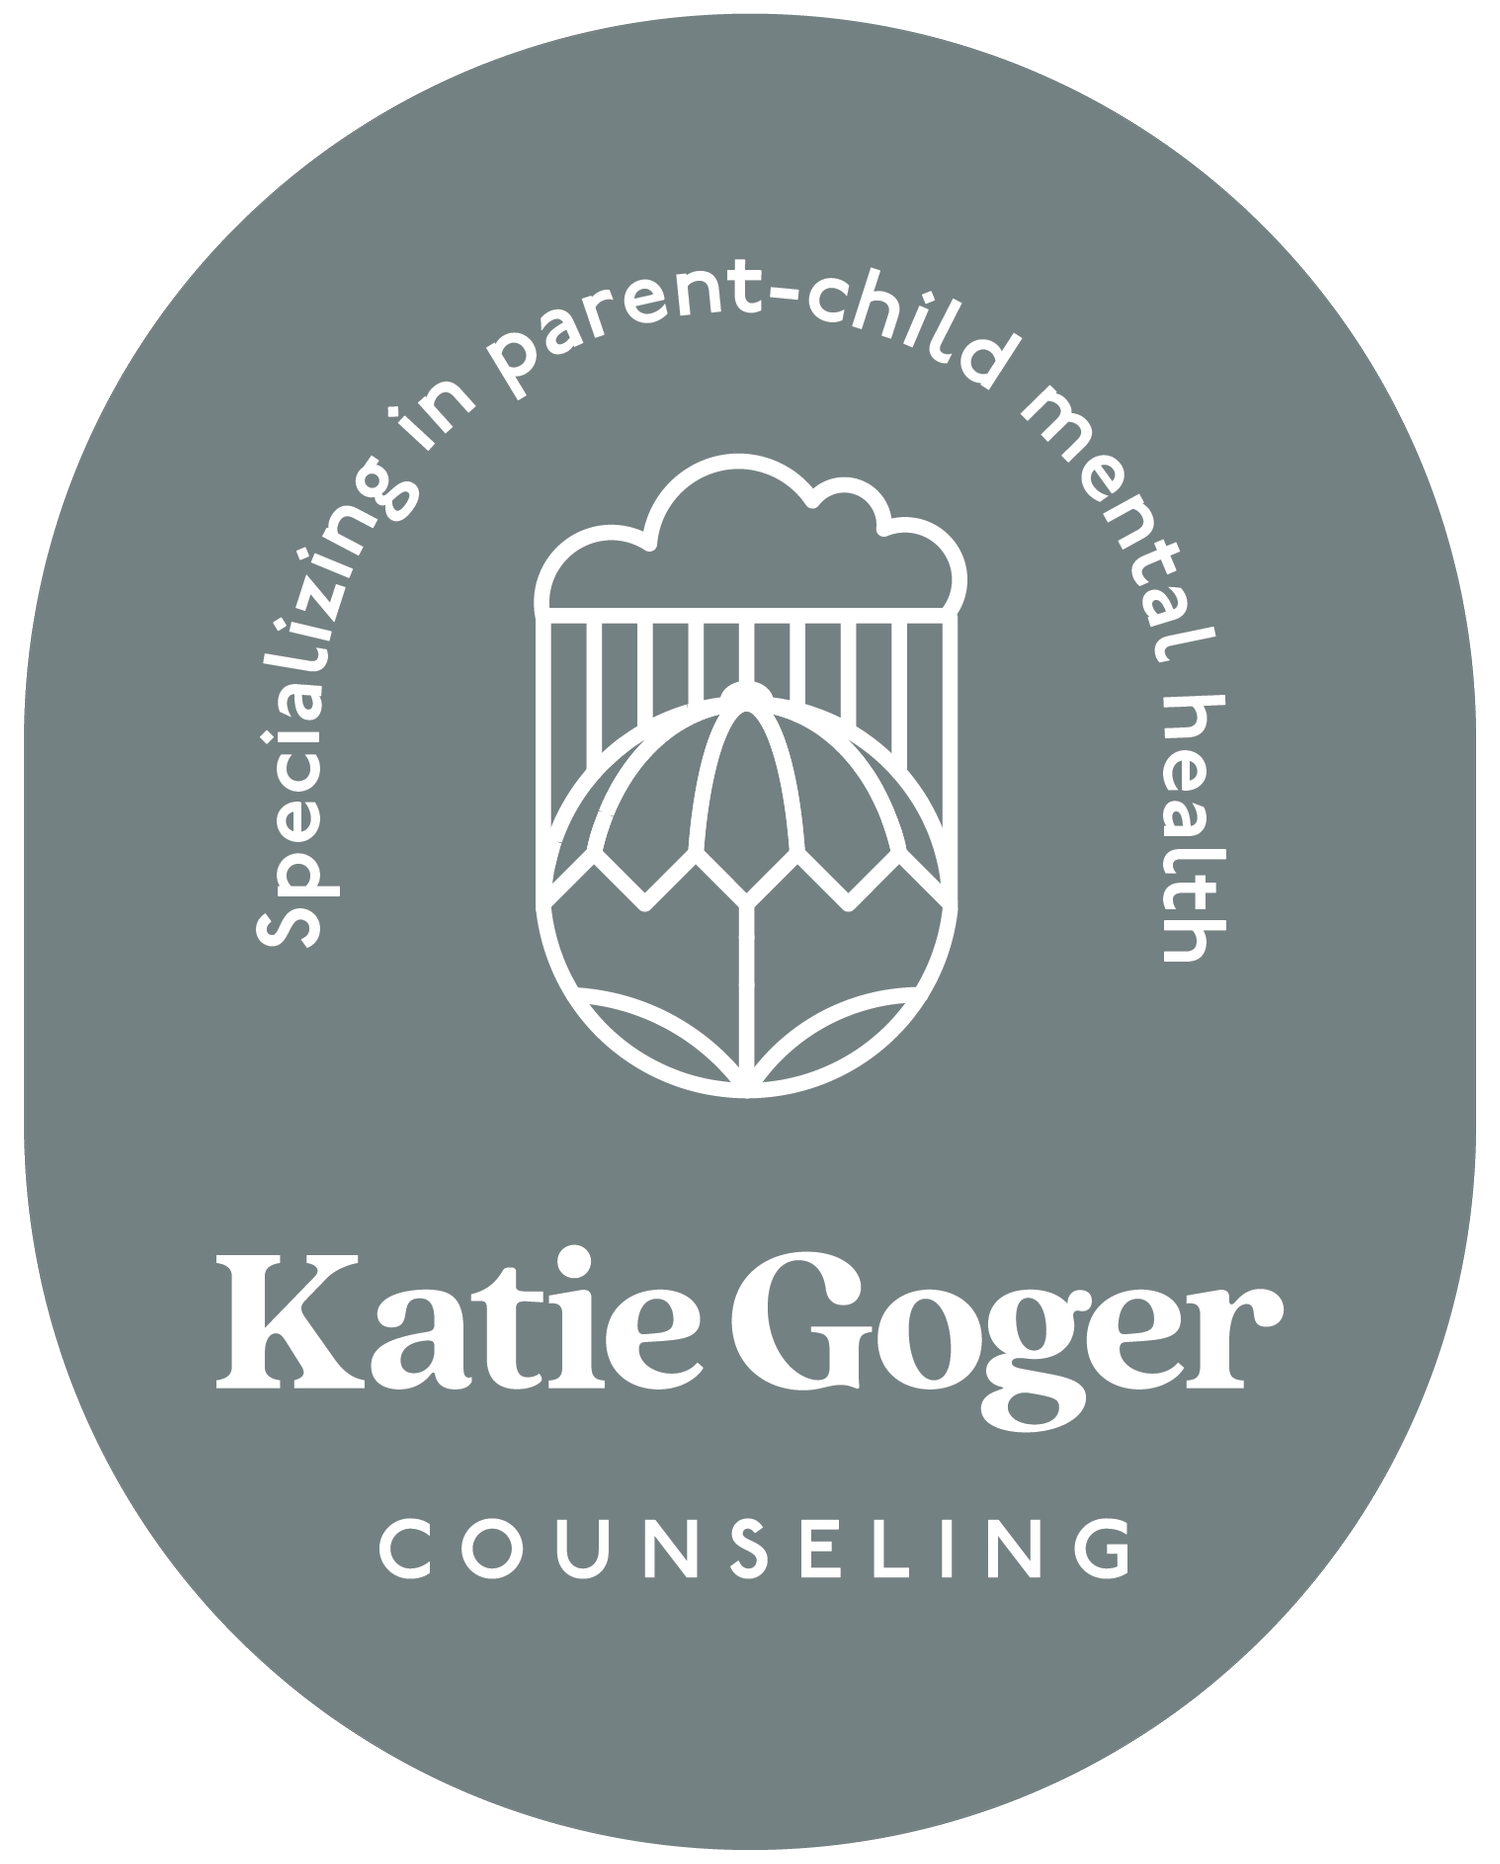 Katie Goger Counseling